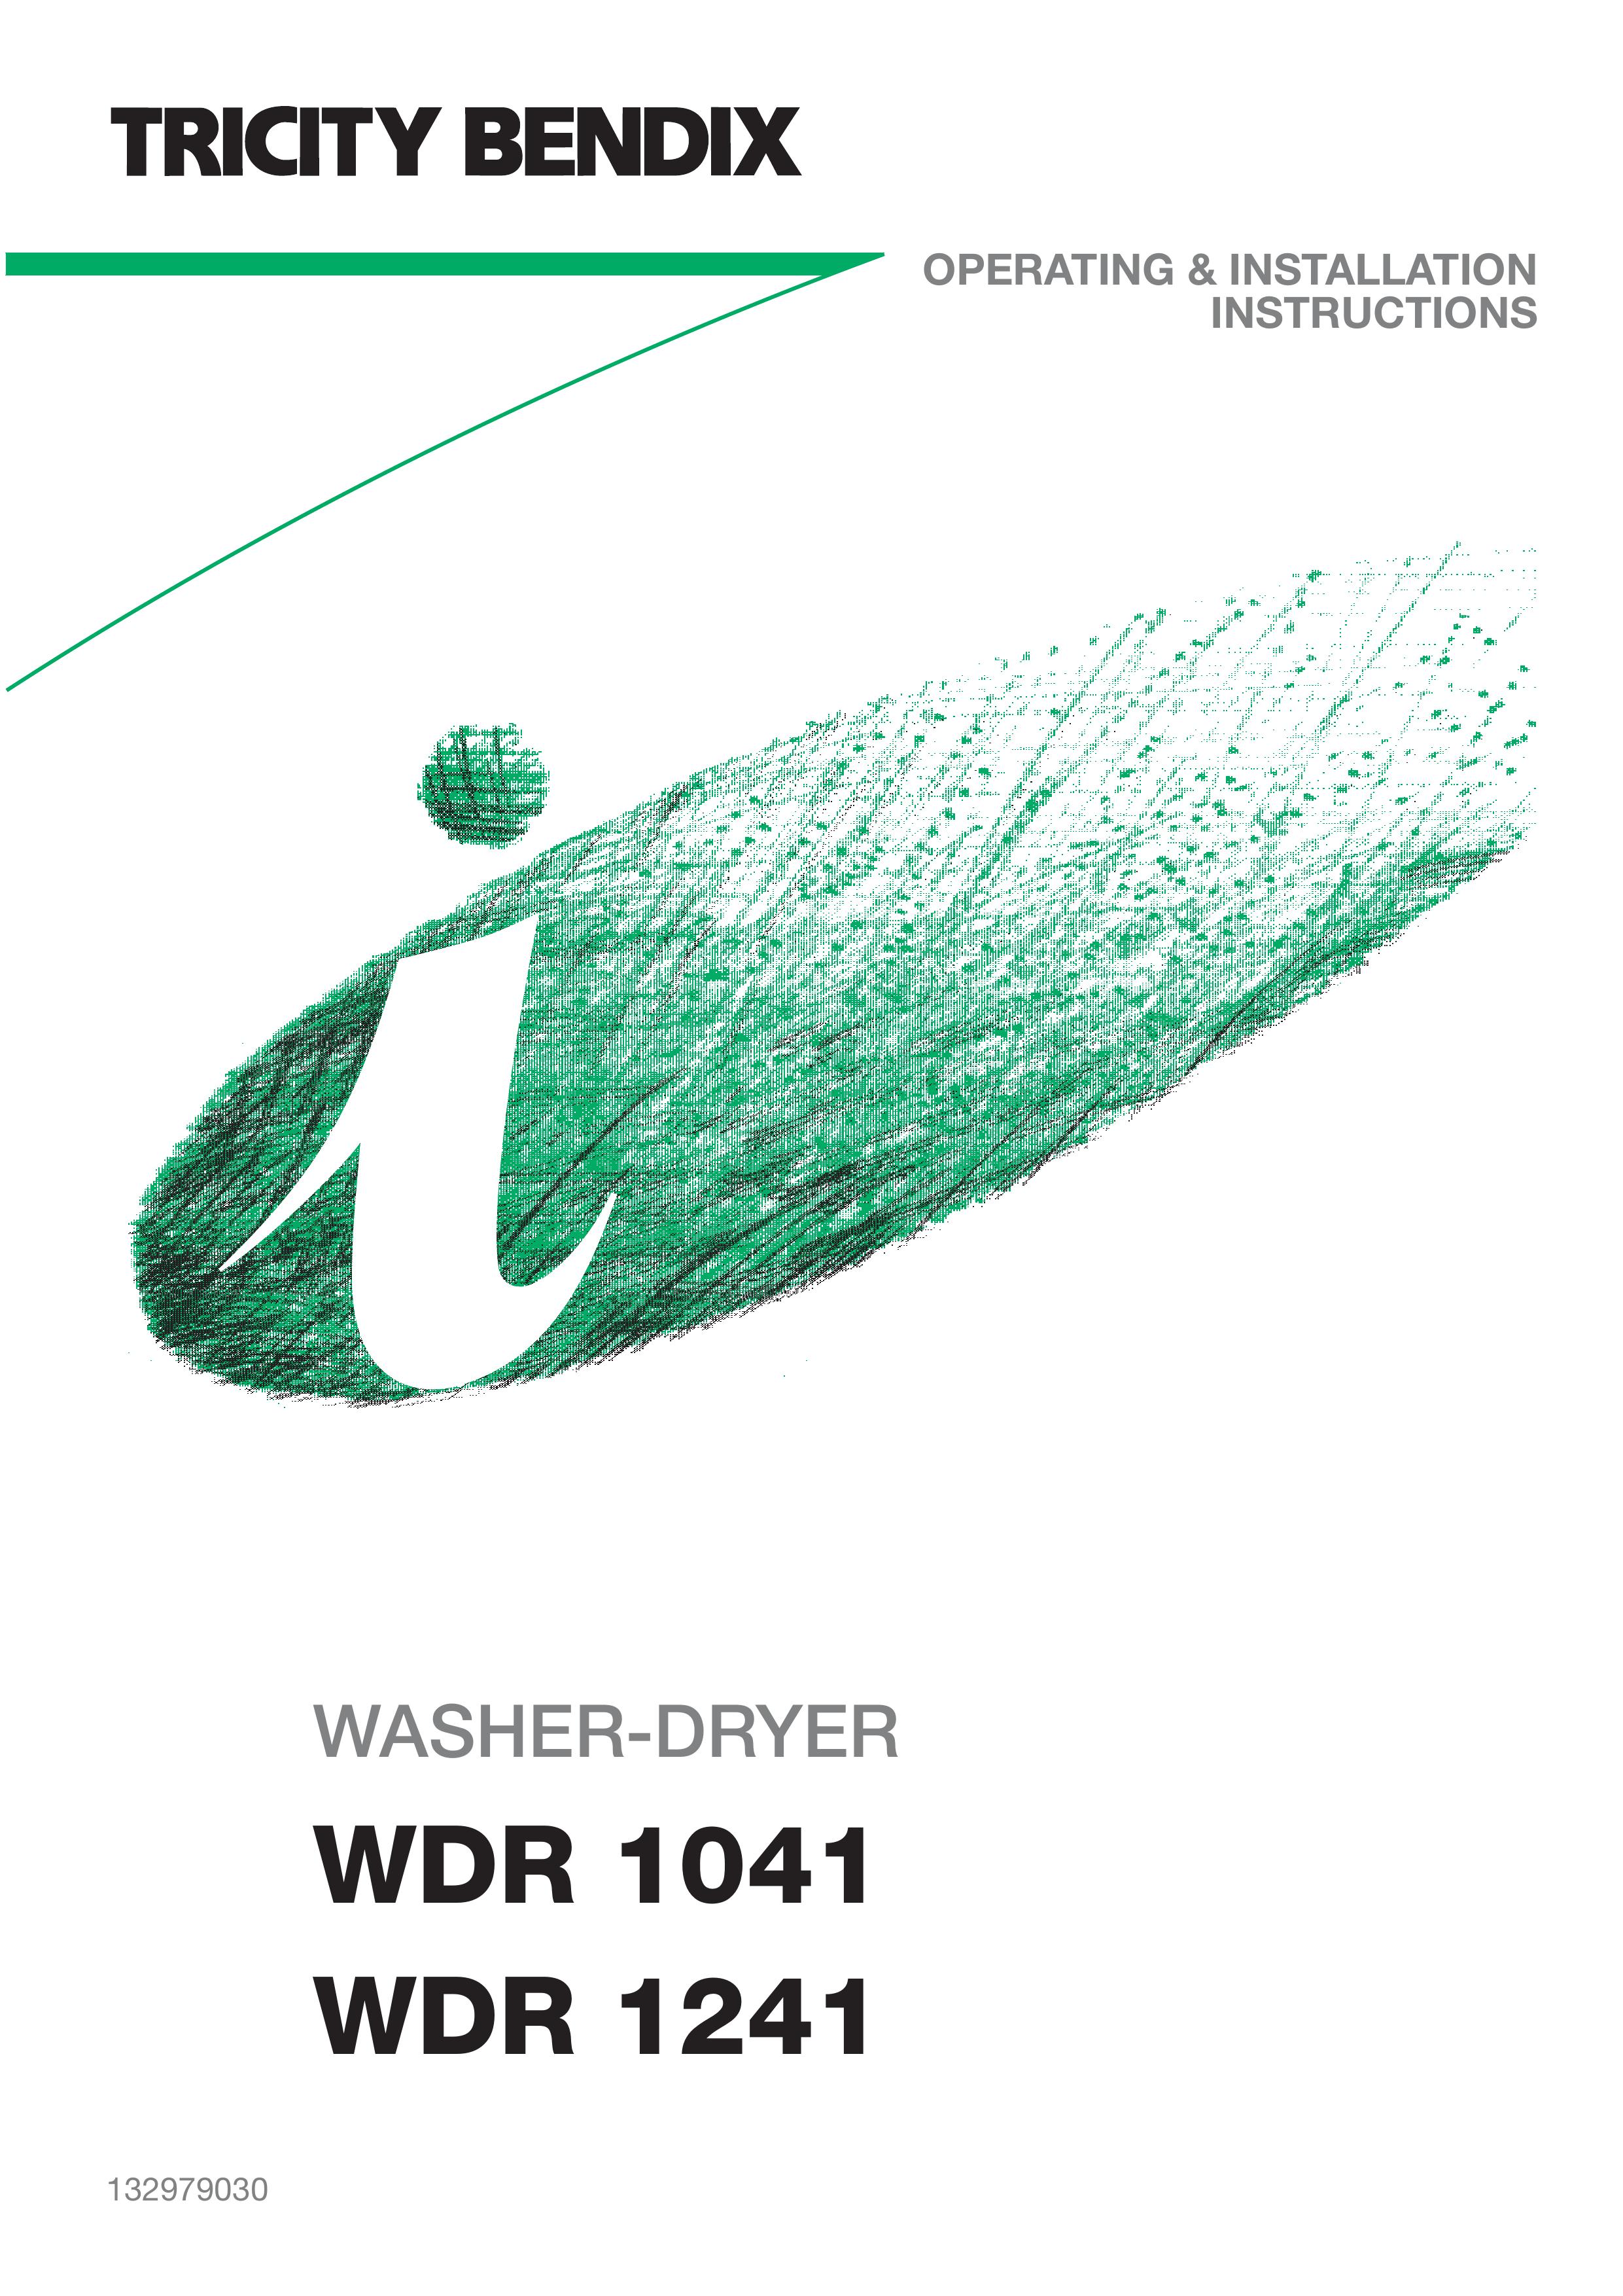 Tricity Bendix WDR 1041 Washer/Dryer User Manual